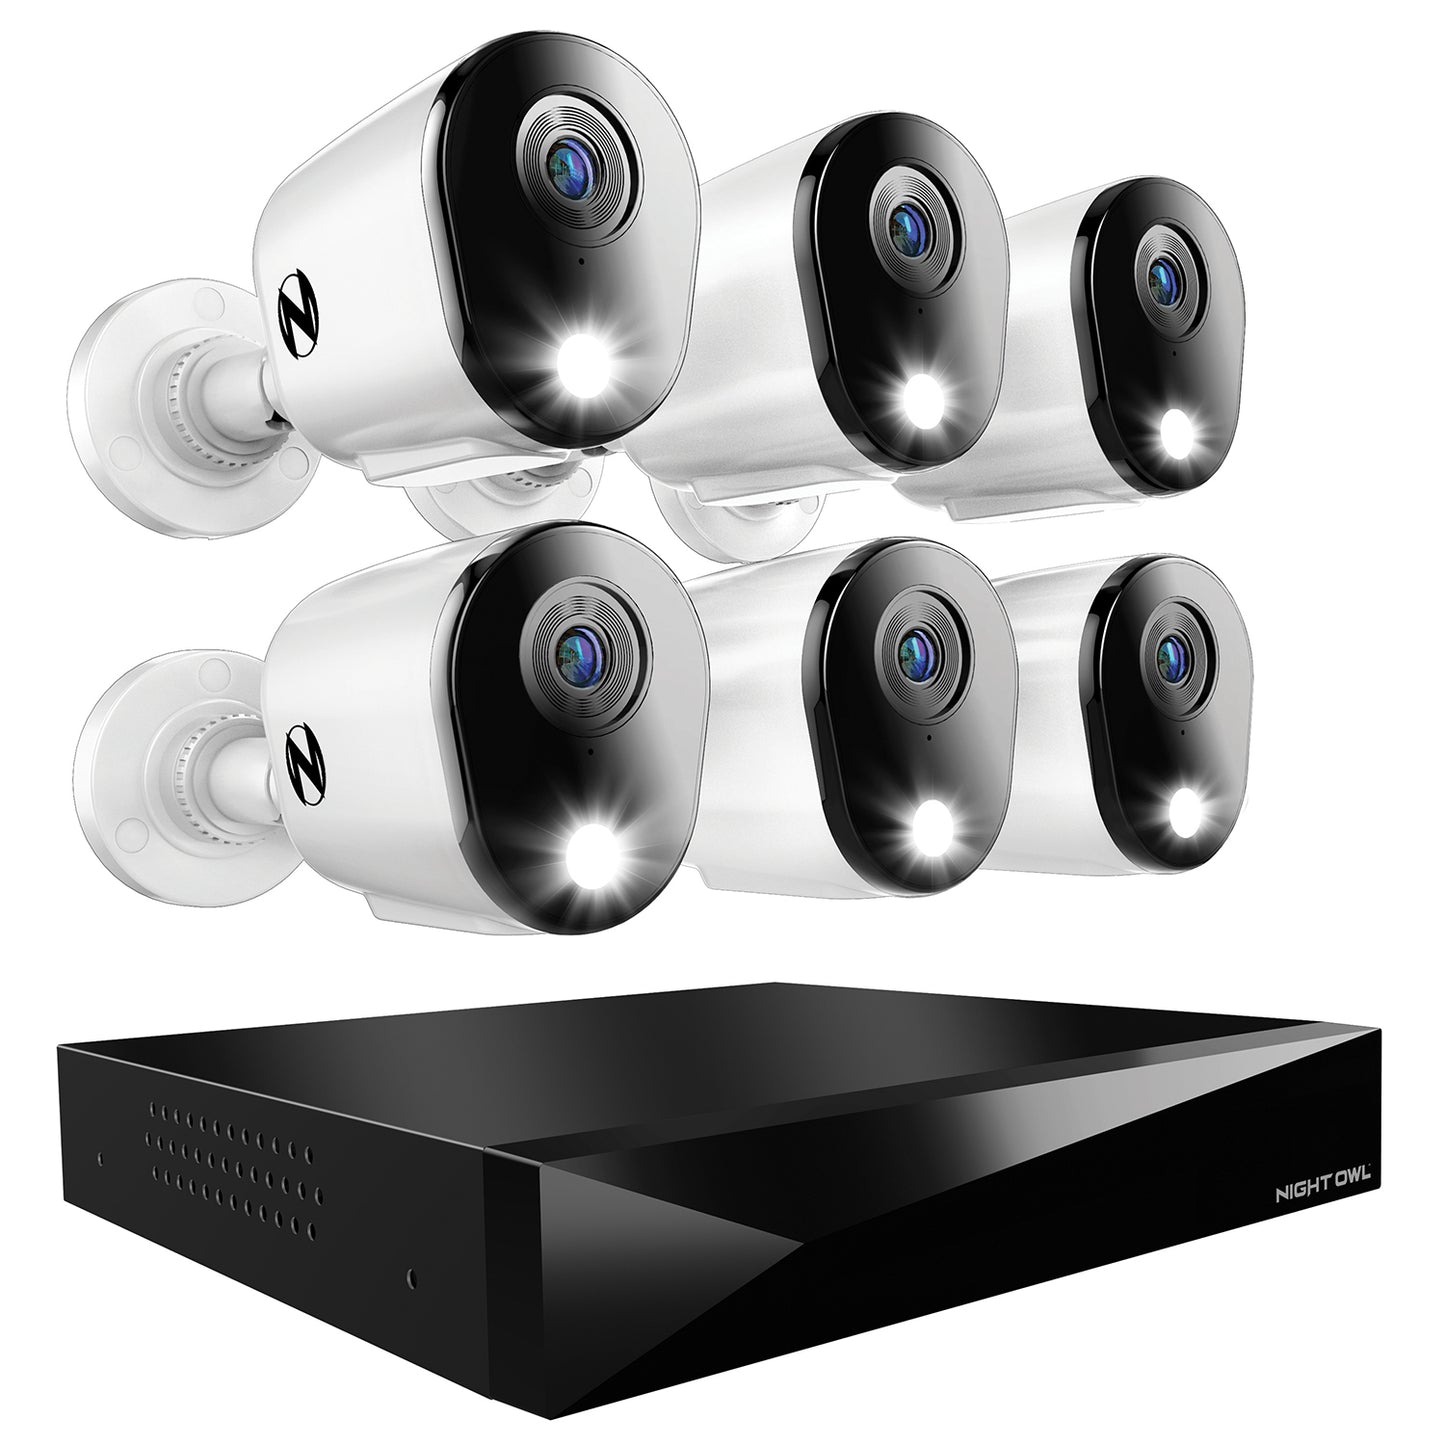 2-Way Audio 12 Channel DVR Security System with 2TB Hard Drive and 6 Wired 2K Deterrence Cameras